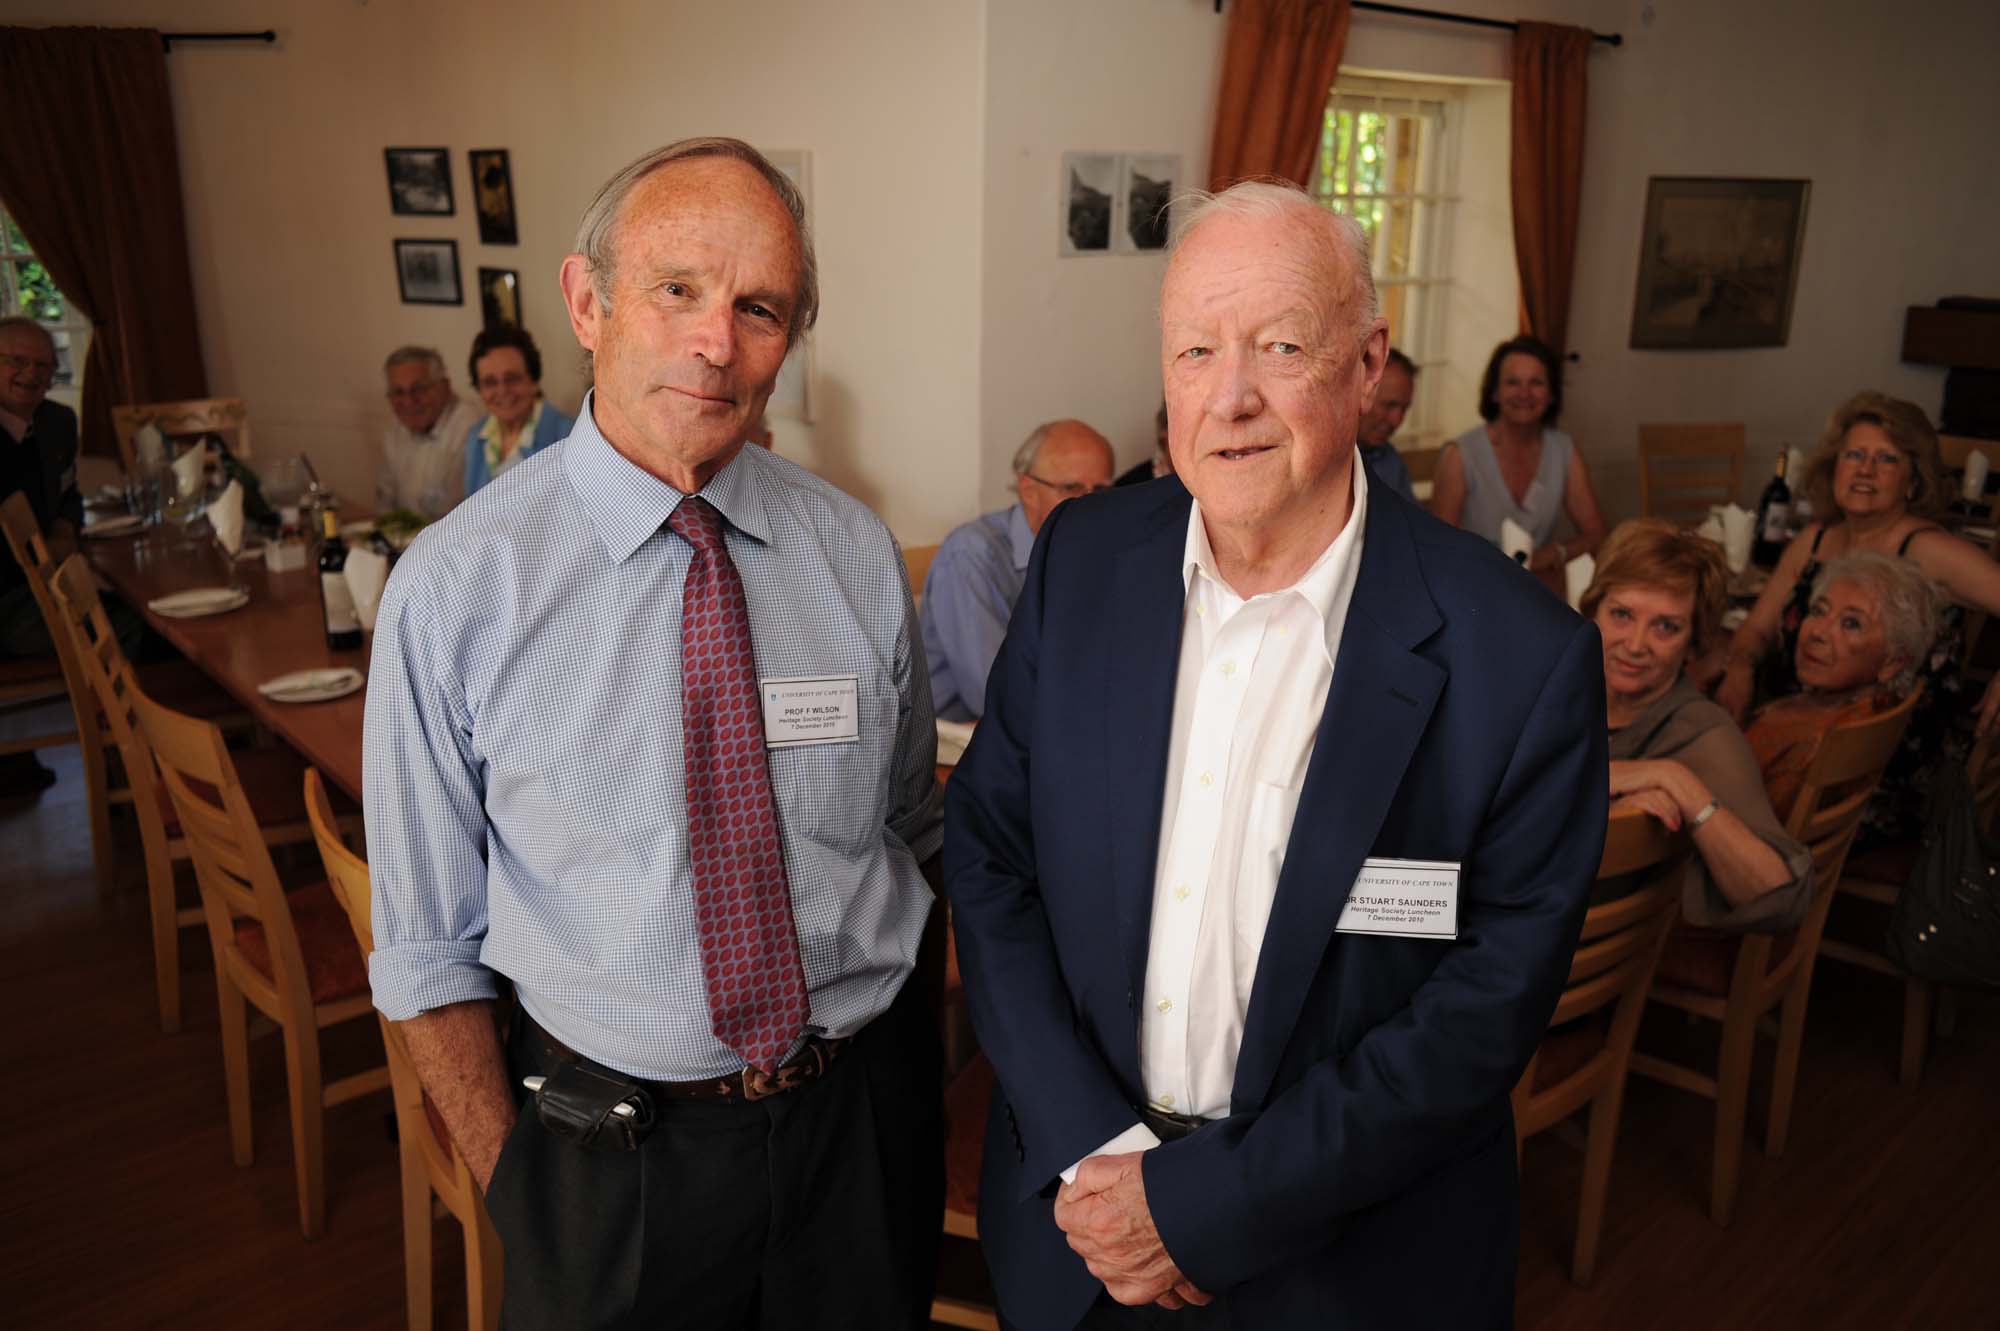 Sharing a moment with Prof Francis Wilson (founder of the Southern Africa Labour and Development Research Unit [SALDRU]) at a UCT Heritage Society lunch in December 2010.